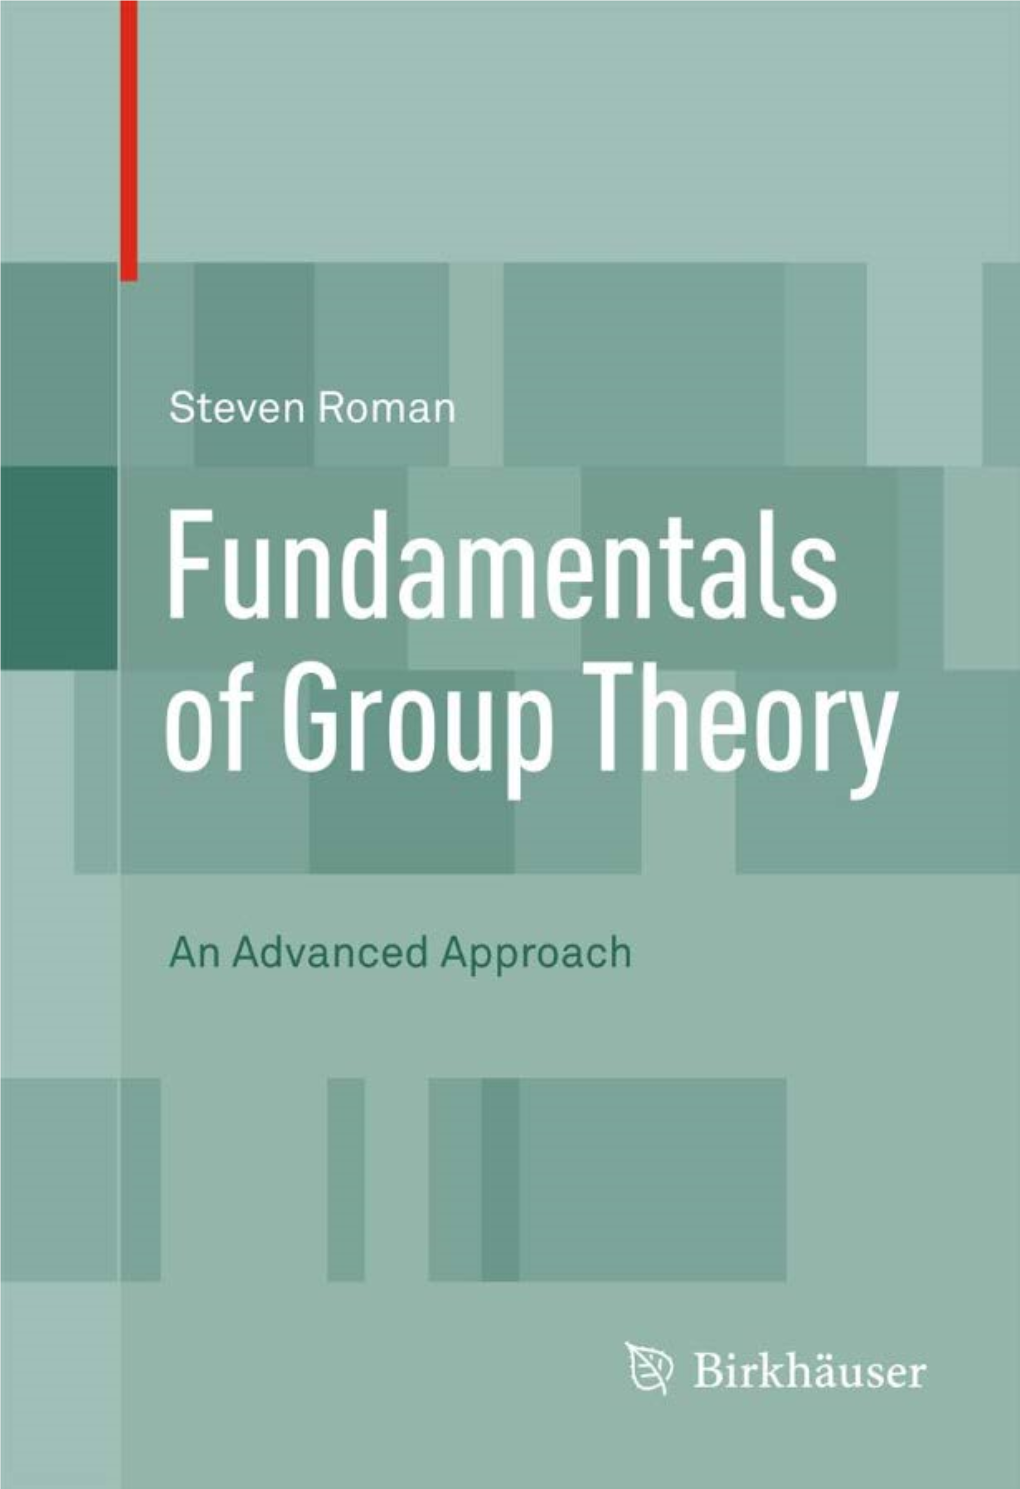 Fundamentals of Group Theory: an Advanced Approach, 1 DOI 10.1007/978-0-8176-8301-6 1, © Springer Science+Business Media, LLC 2012 2 Fundamentals of Group Theory